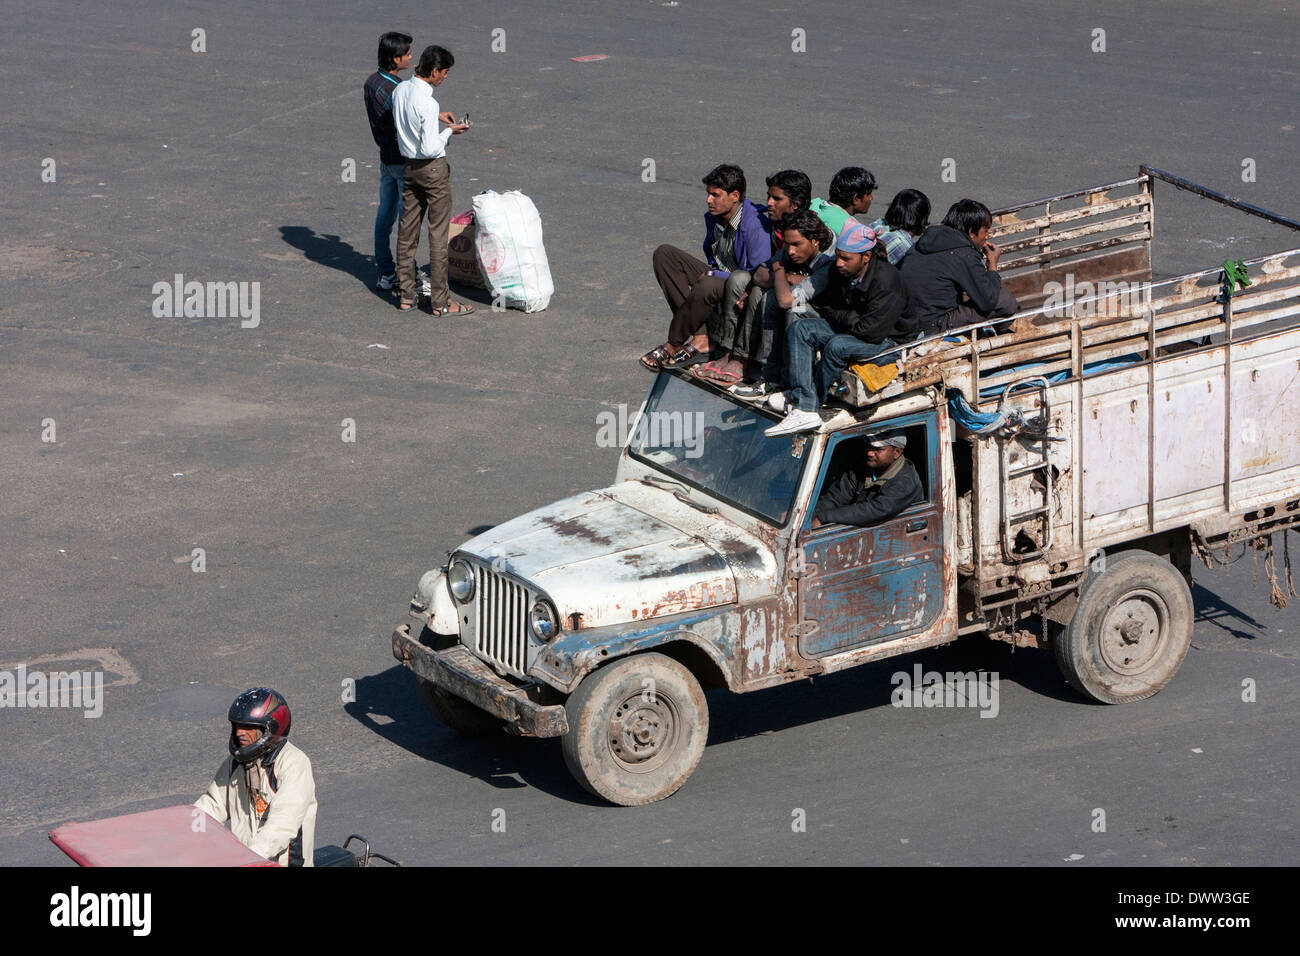 Jaipur, Rajasthan, India. Road safety in Mid-day Traffic in Downtown Jaipur. Stock Photo